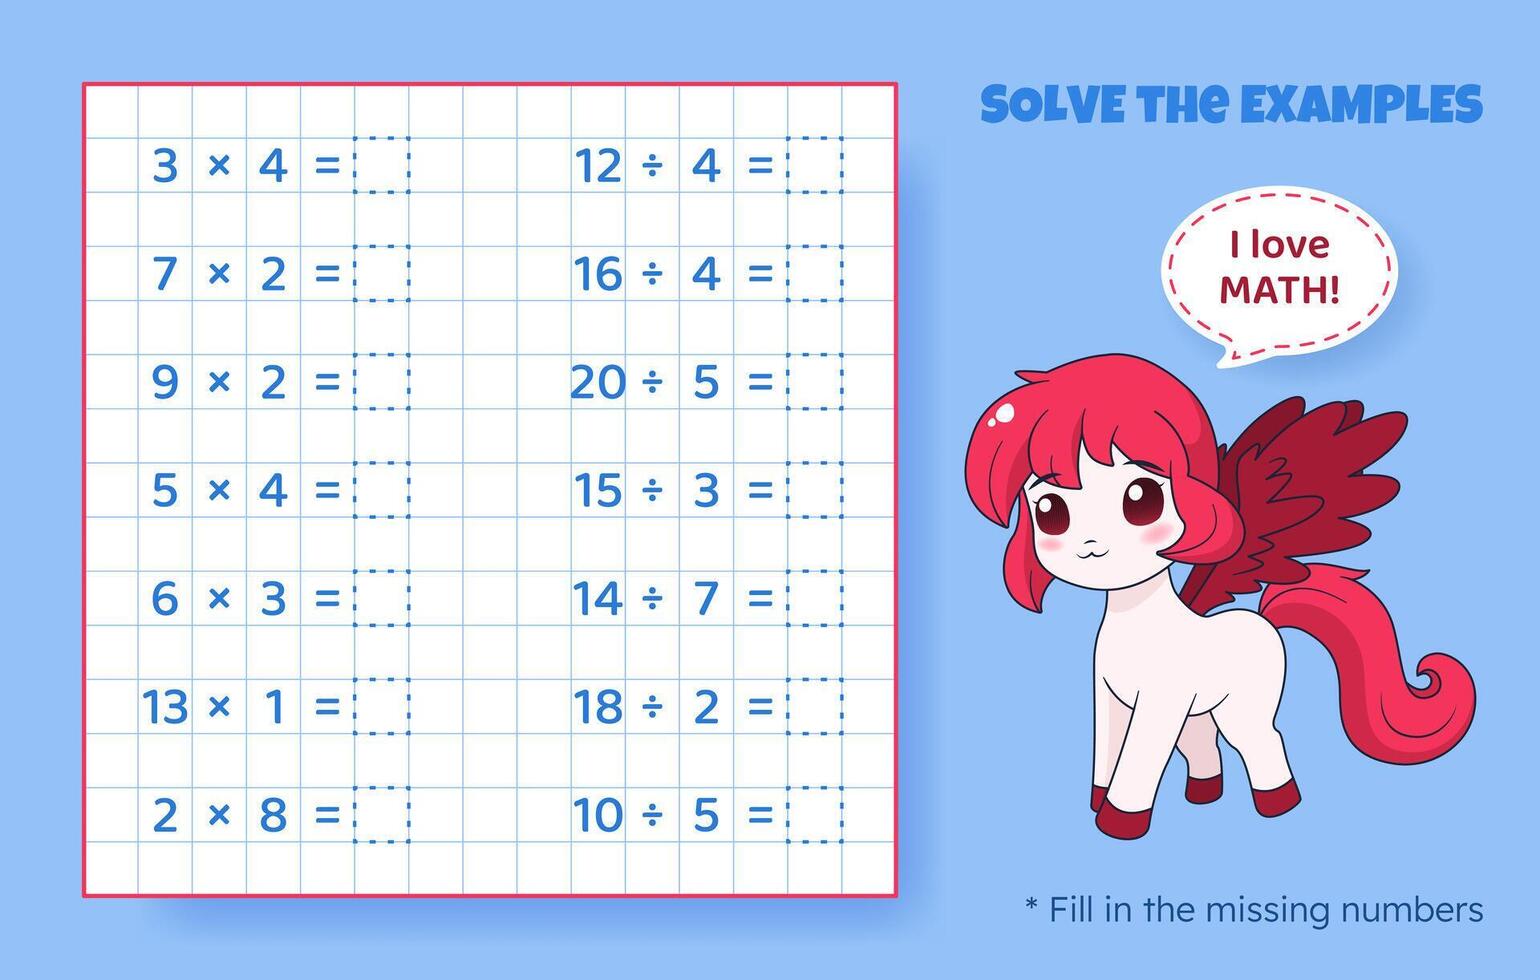 Solve the examples. Multiplication and division up to 20. Mathematical puzzle game. Worksheet for preschool kids. Vector illustration. Cartoon educational game with cute pony for children.